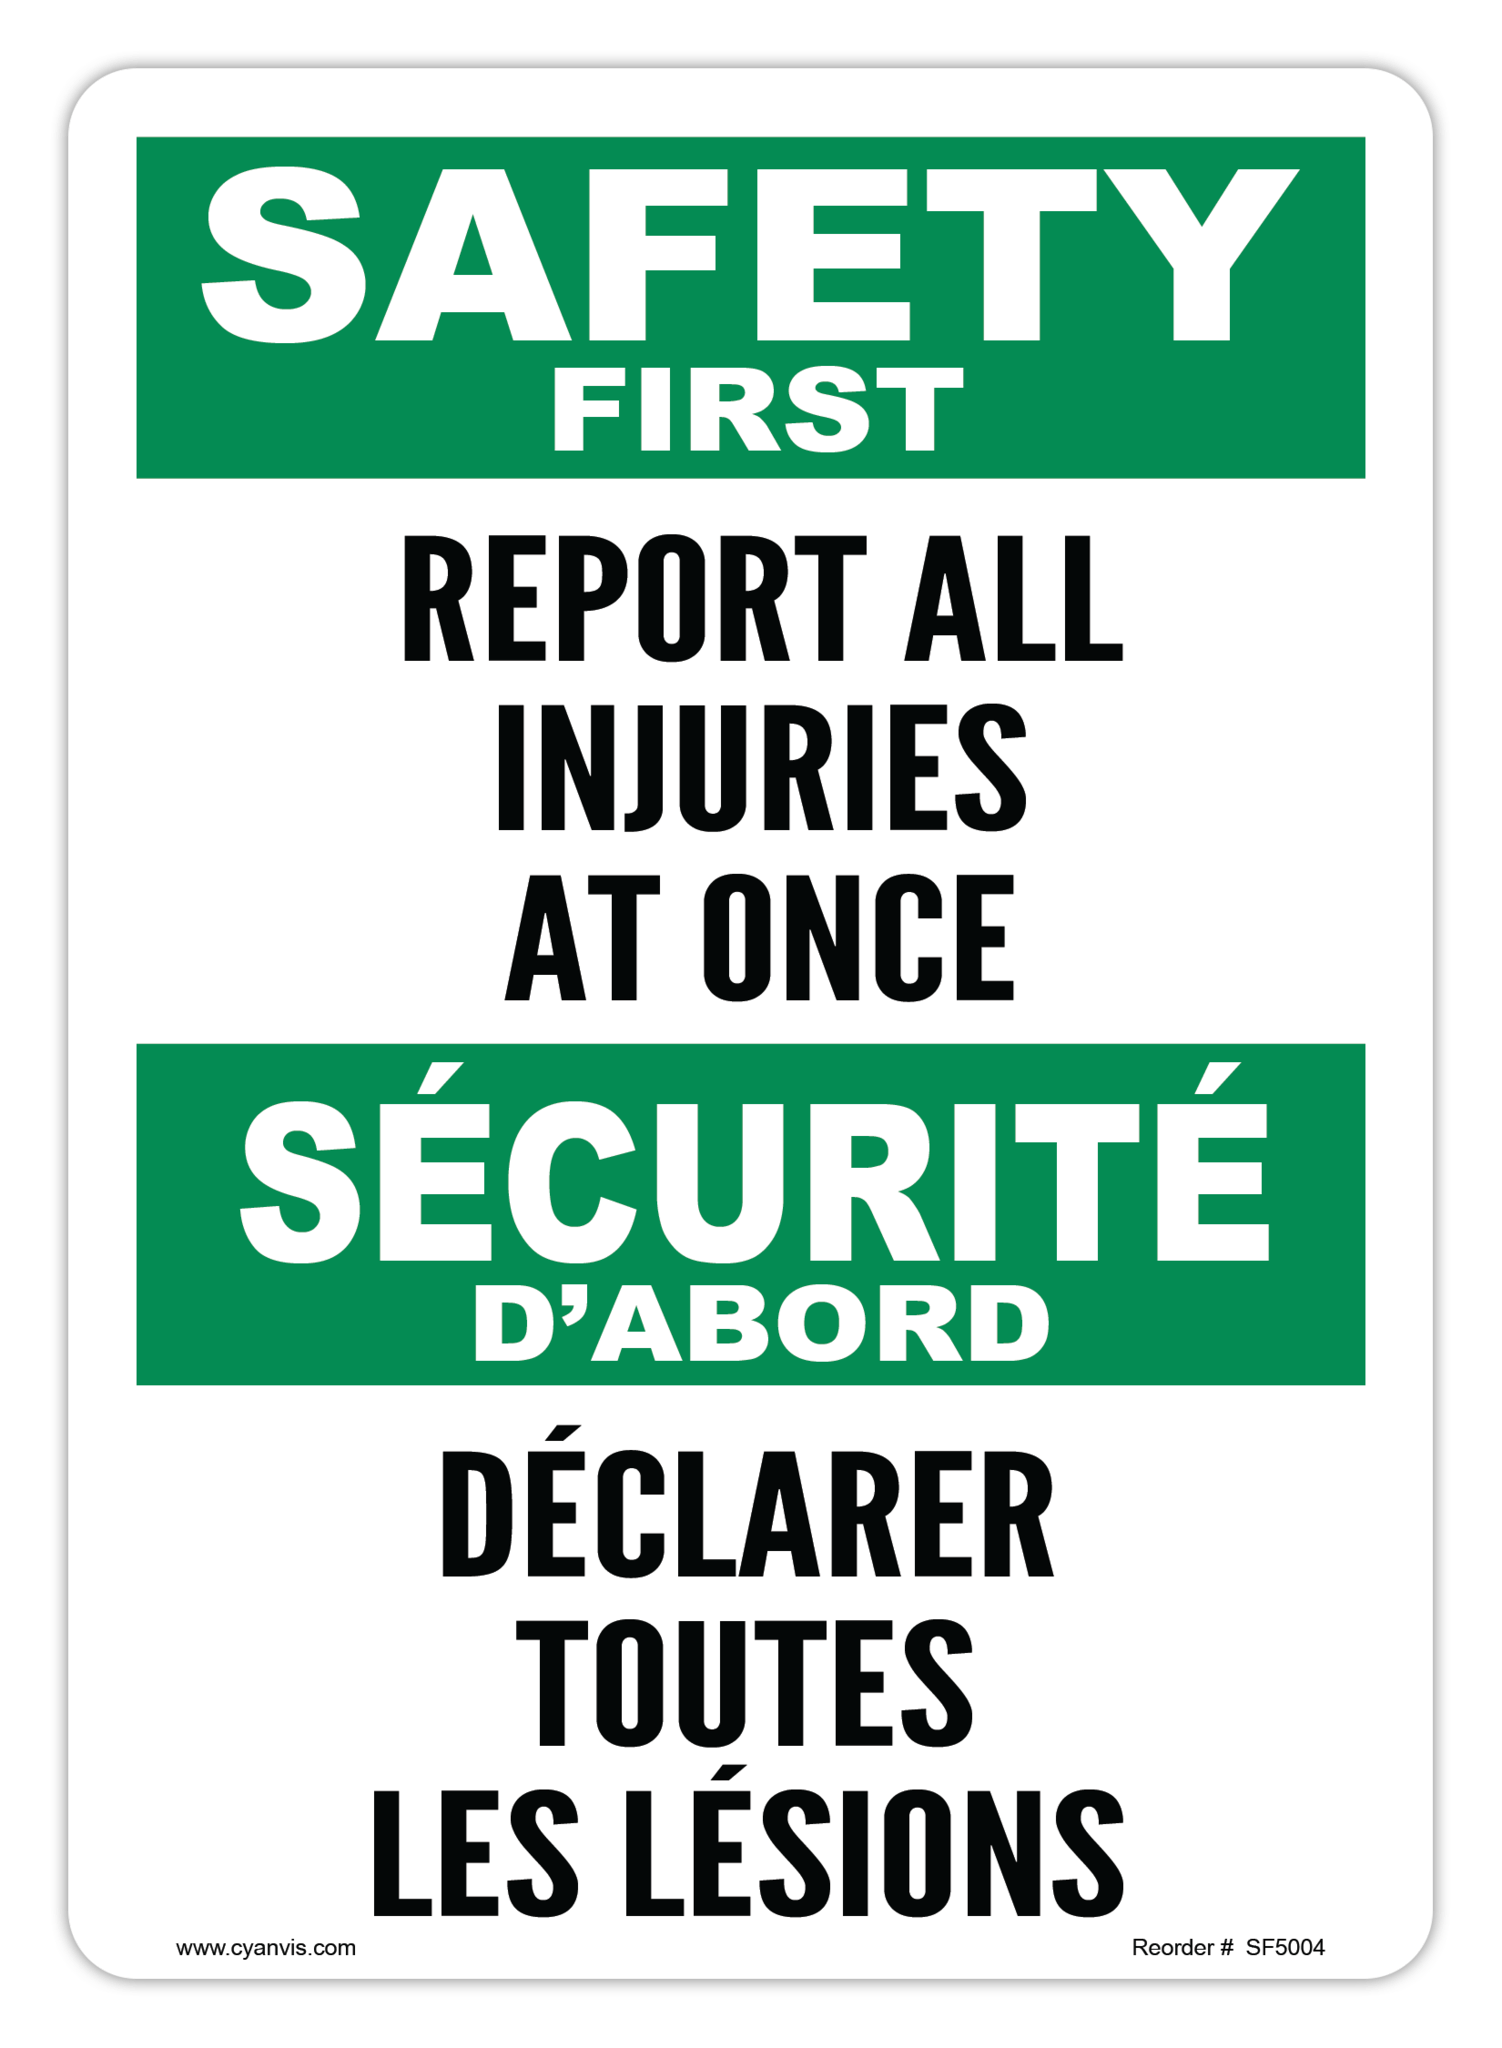 Safety Sign: Bilingual - Safety First - REPORT ALL INJURIES AT ONCE | DÉCLARER TOUTES LES LÉSIONS - CYANvisuals